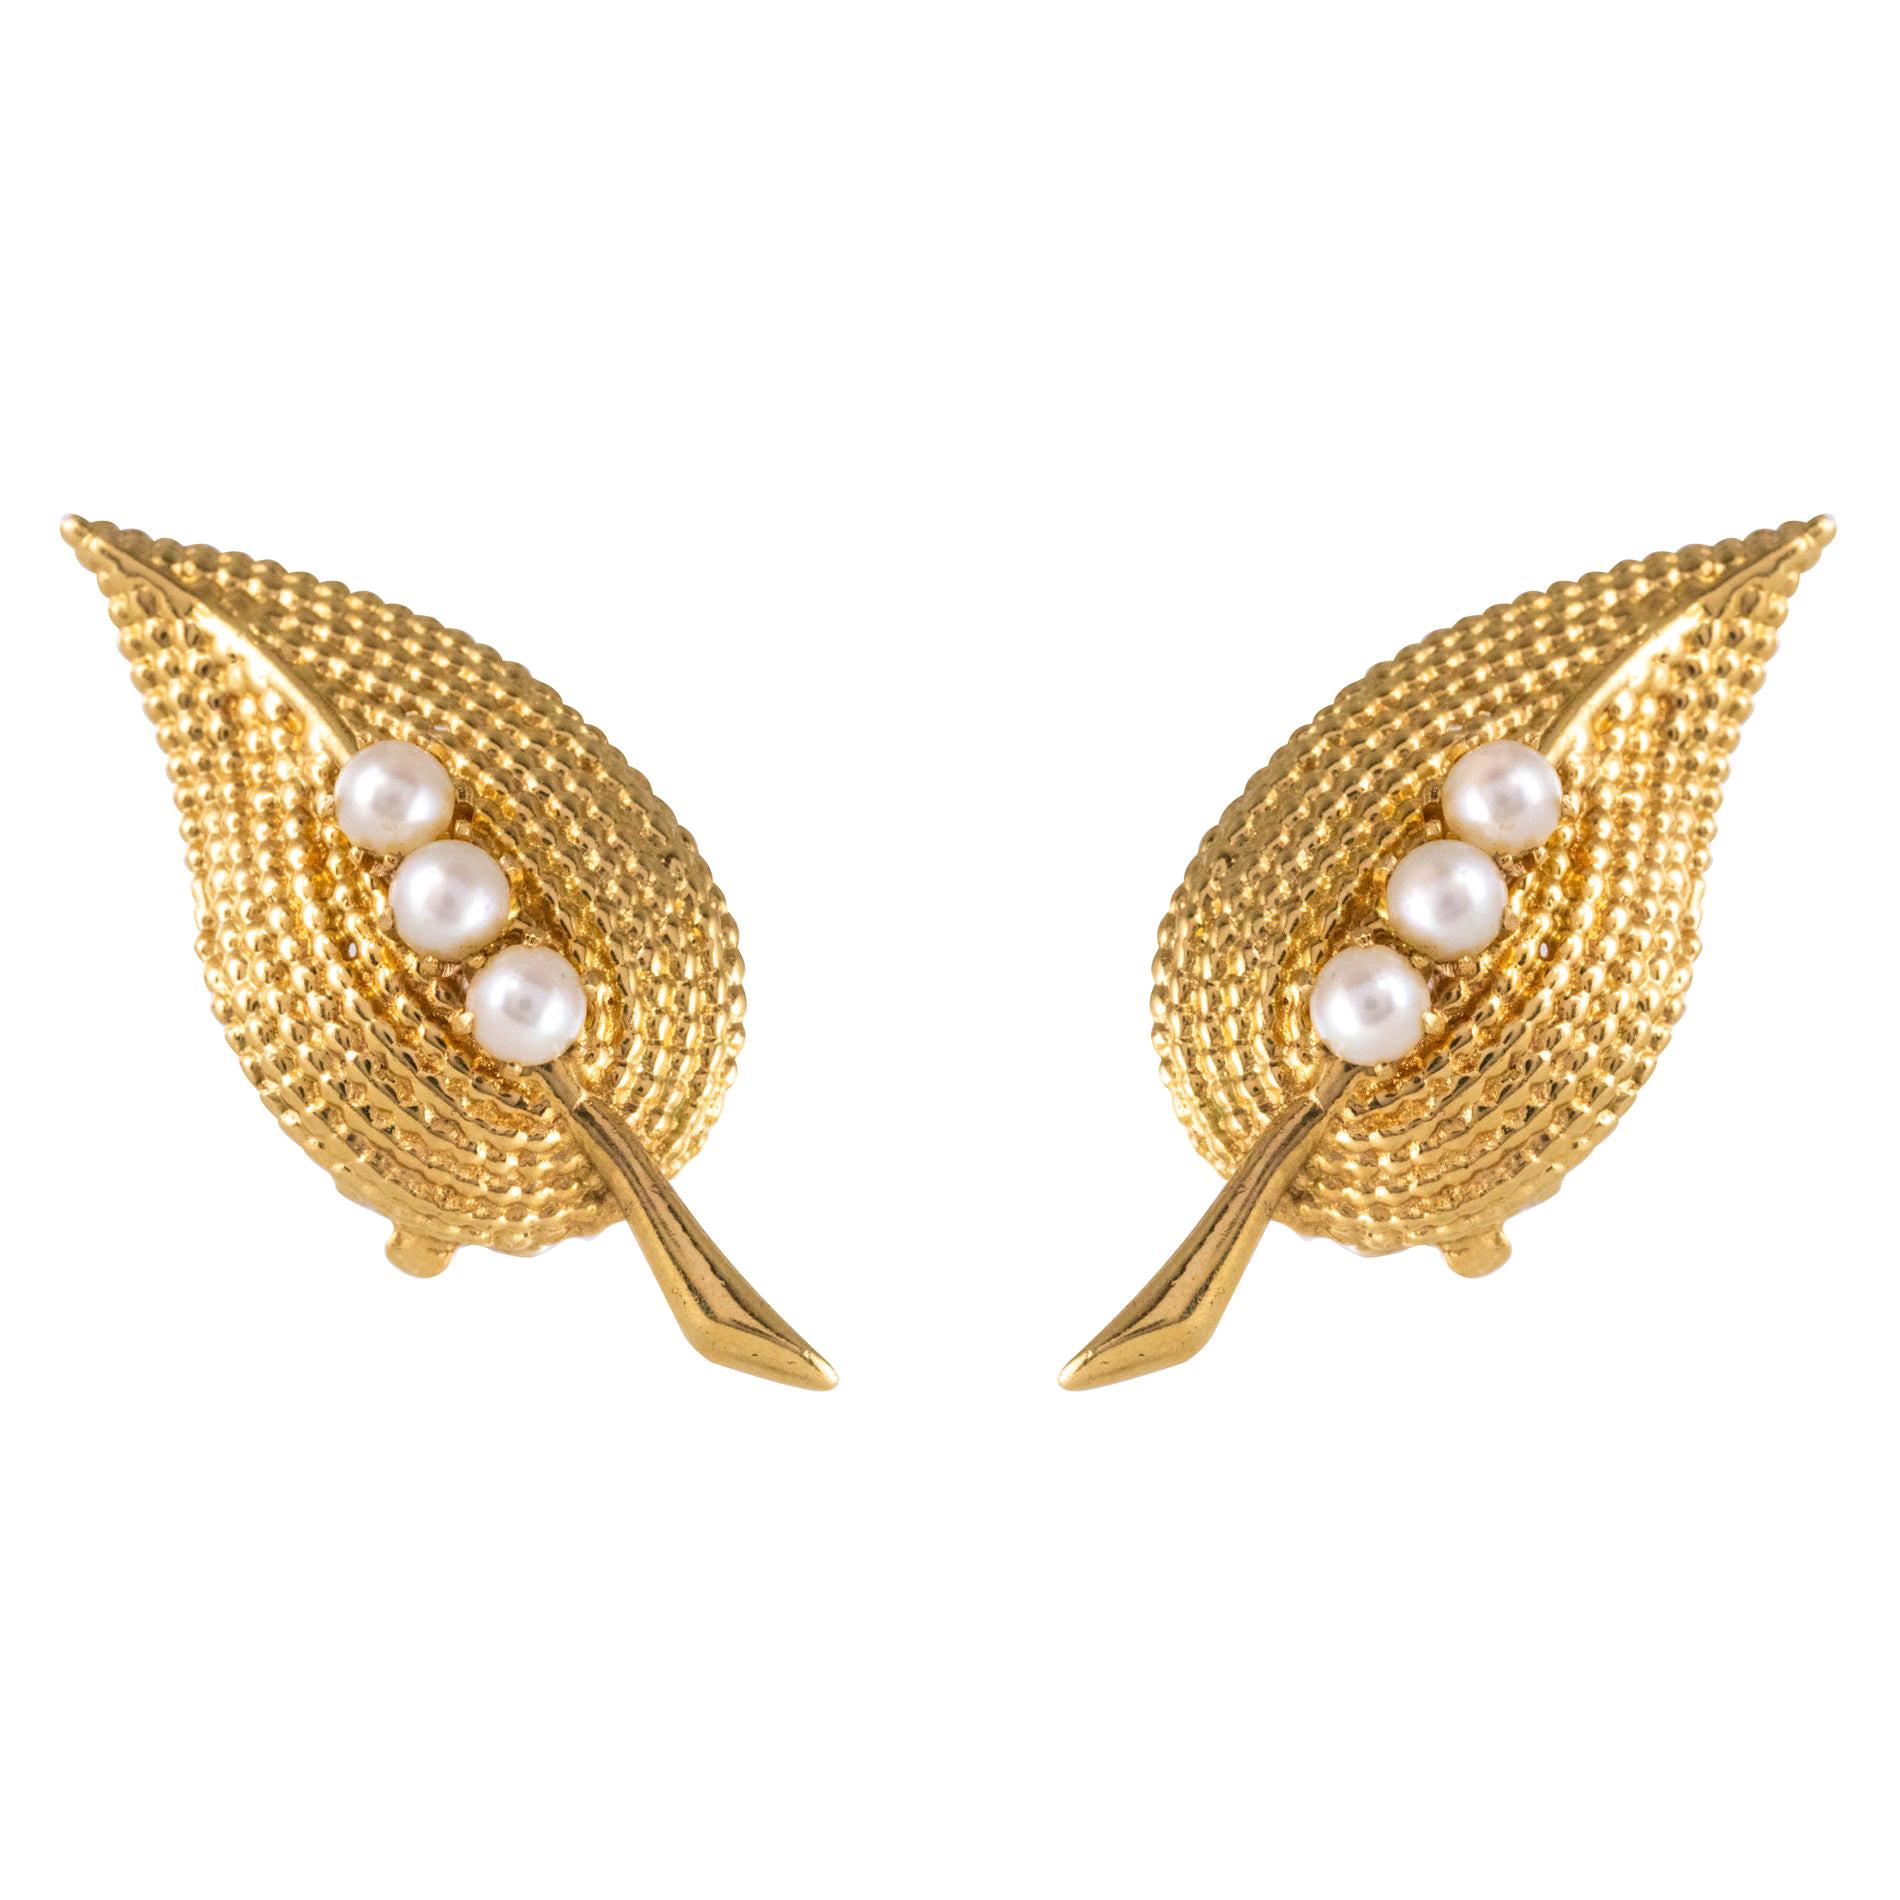 1960s Cultured Pearl Yellow Gold Clips Earrings